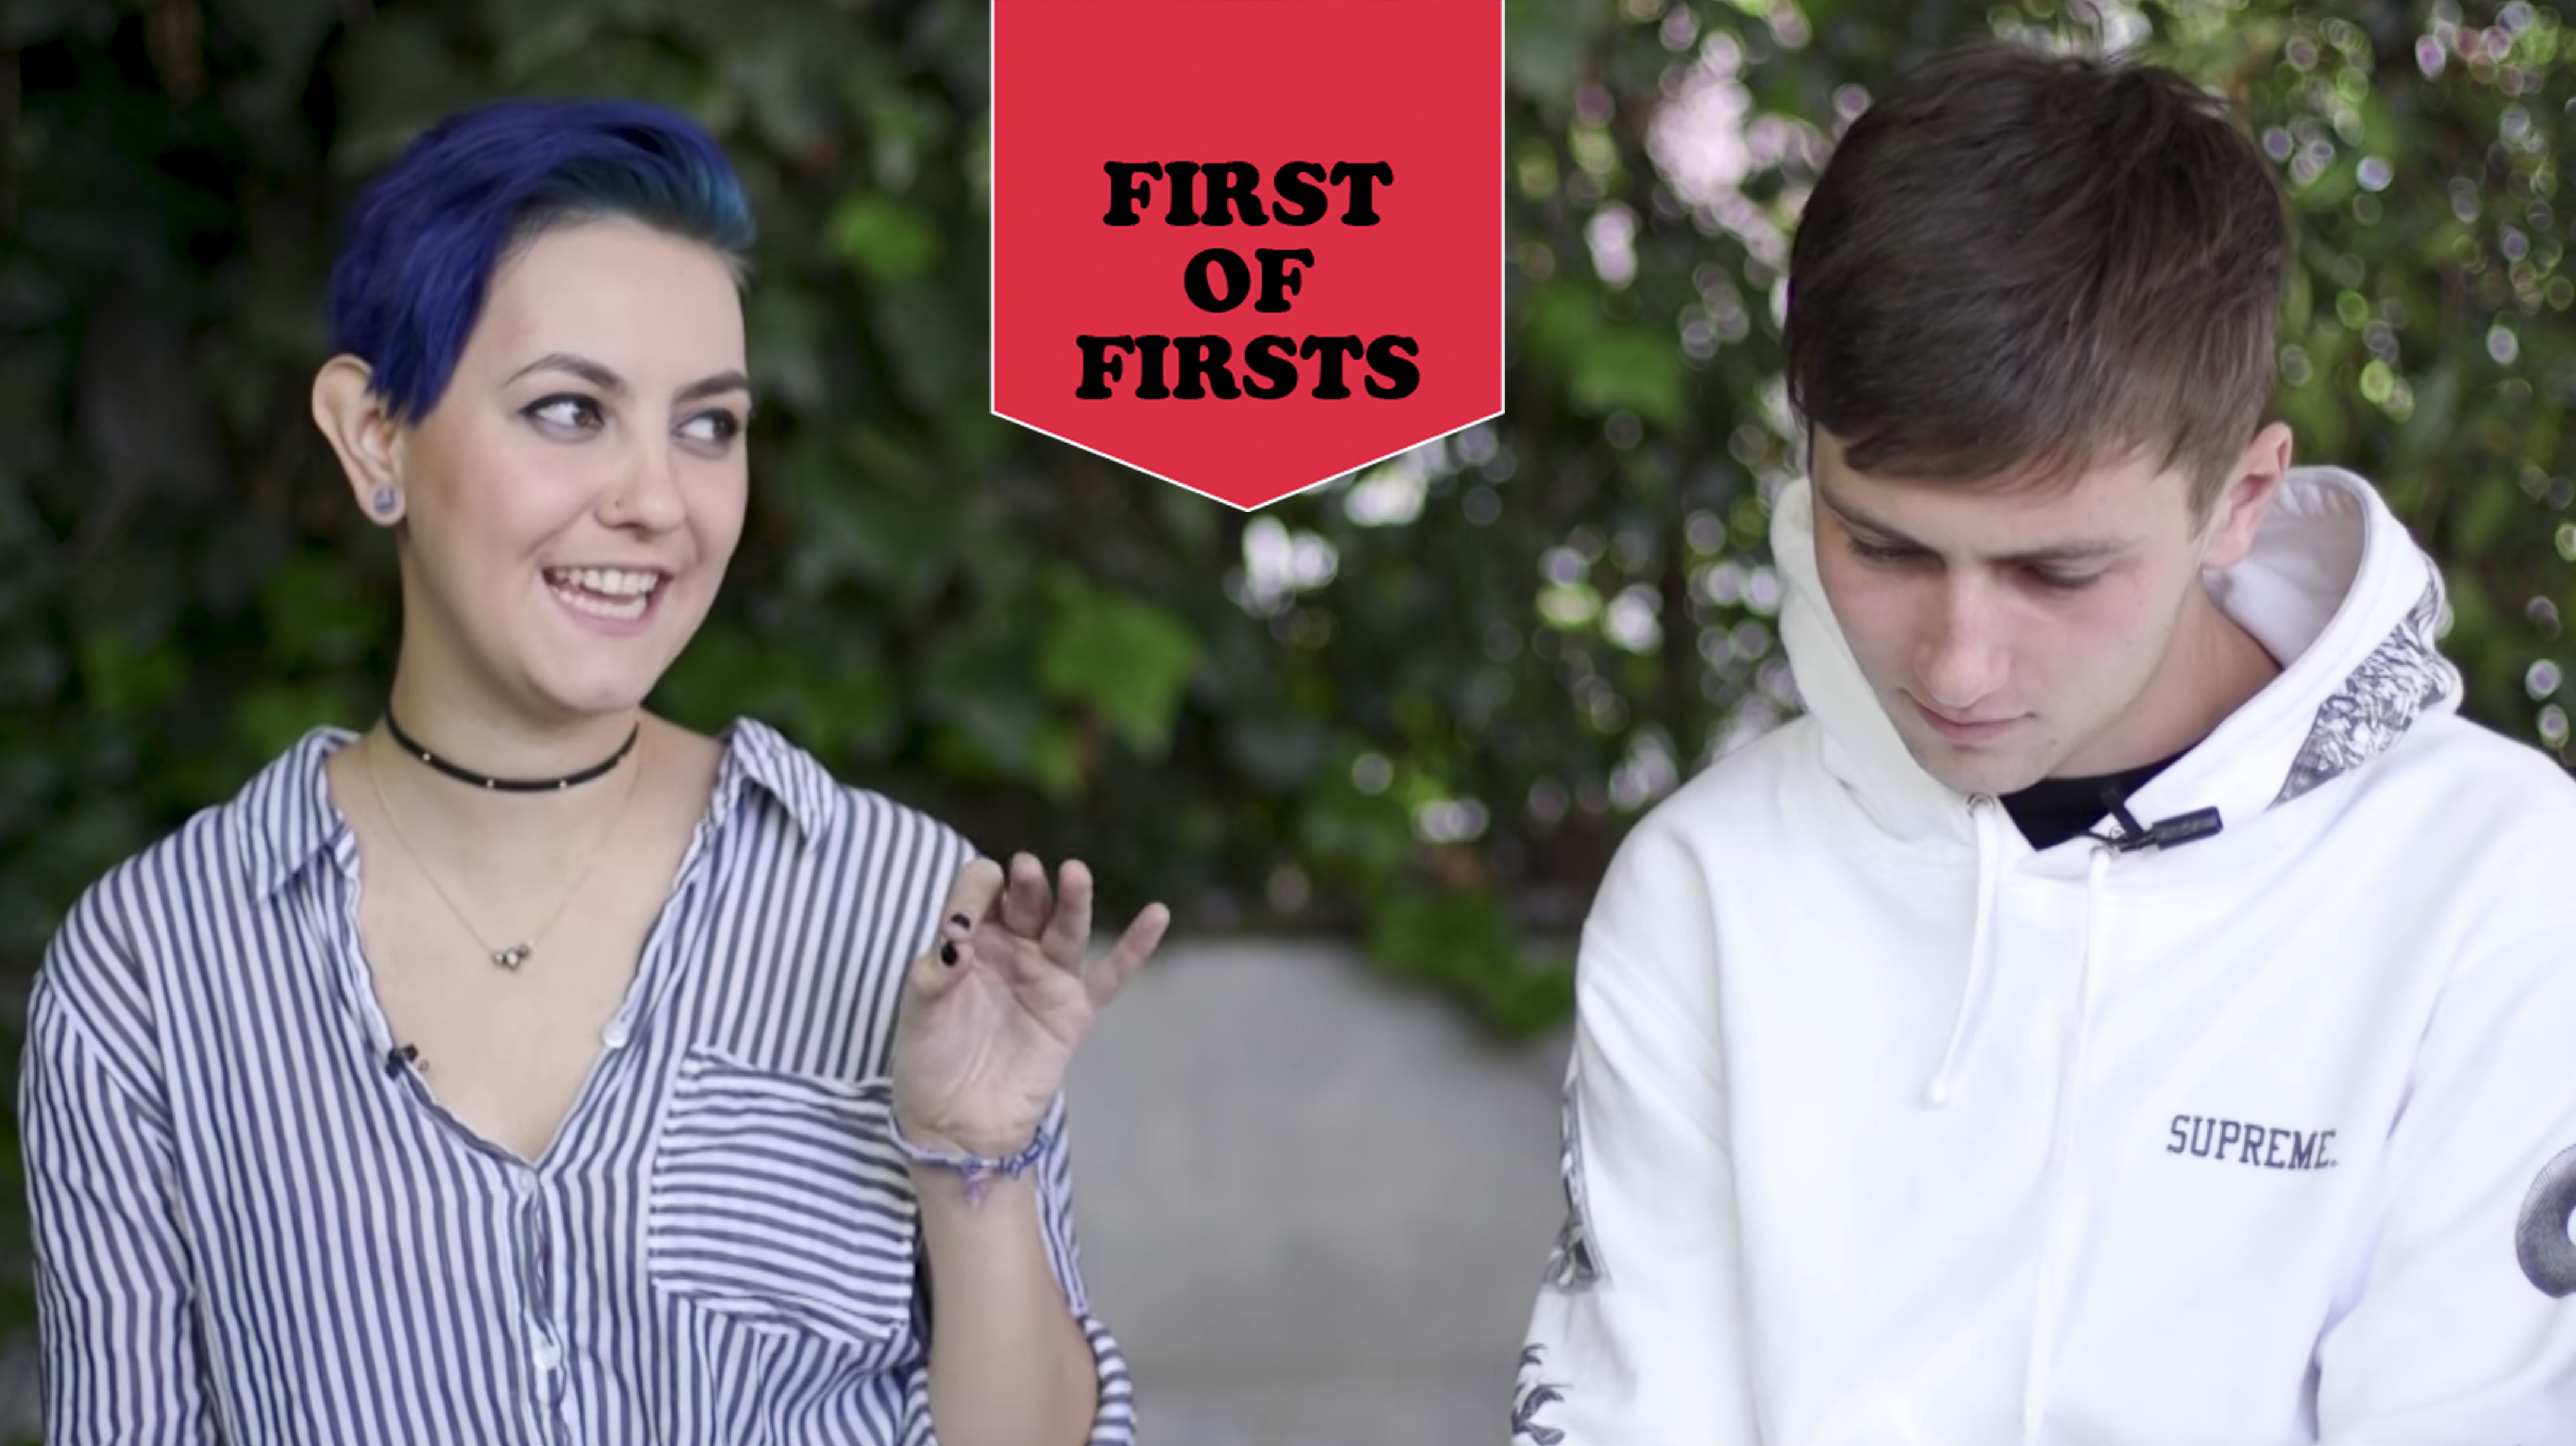 Openside Tell Us All Their Firsts, Including Their First Musical Crushes And The First Thing That Goes On Their Rider